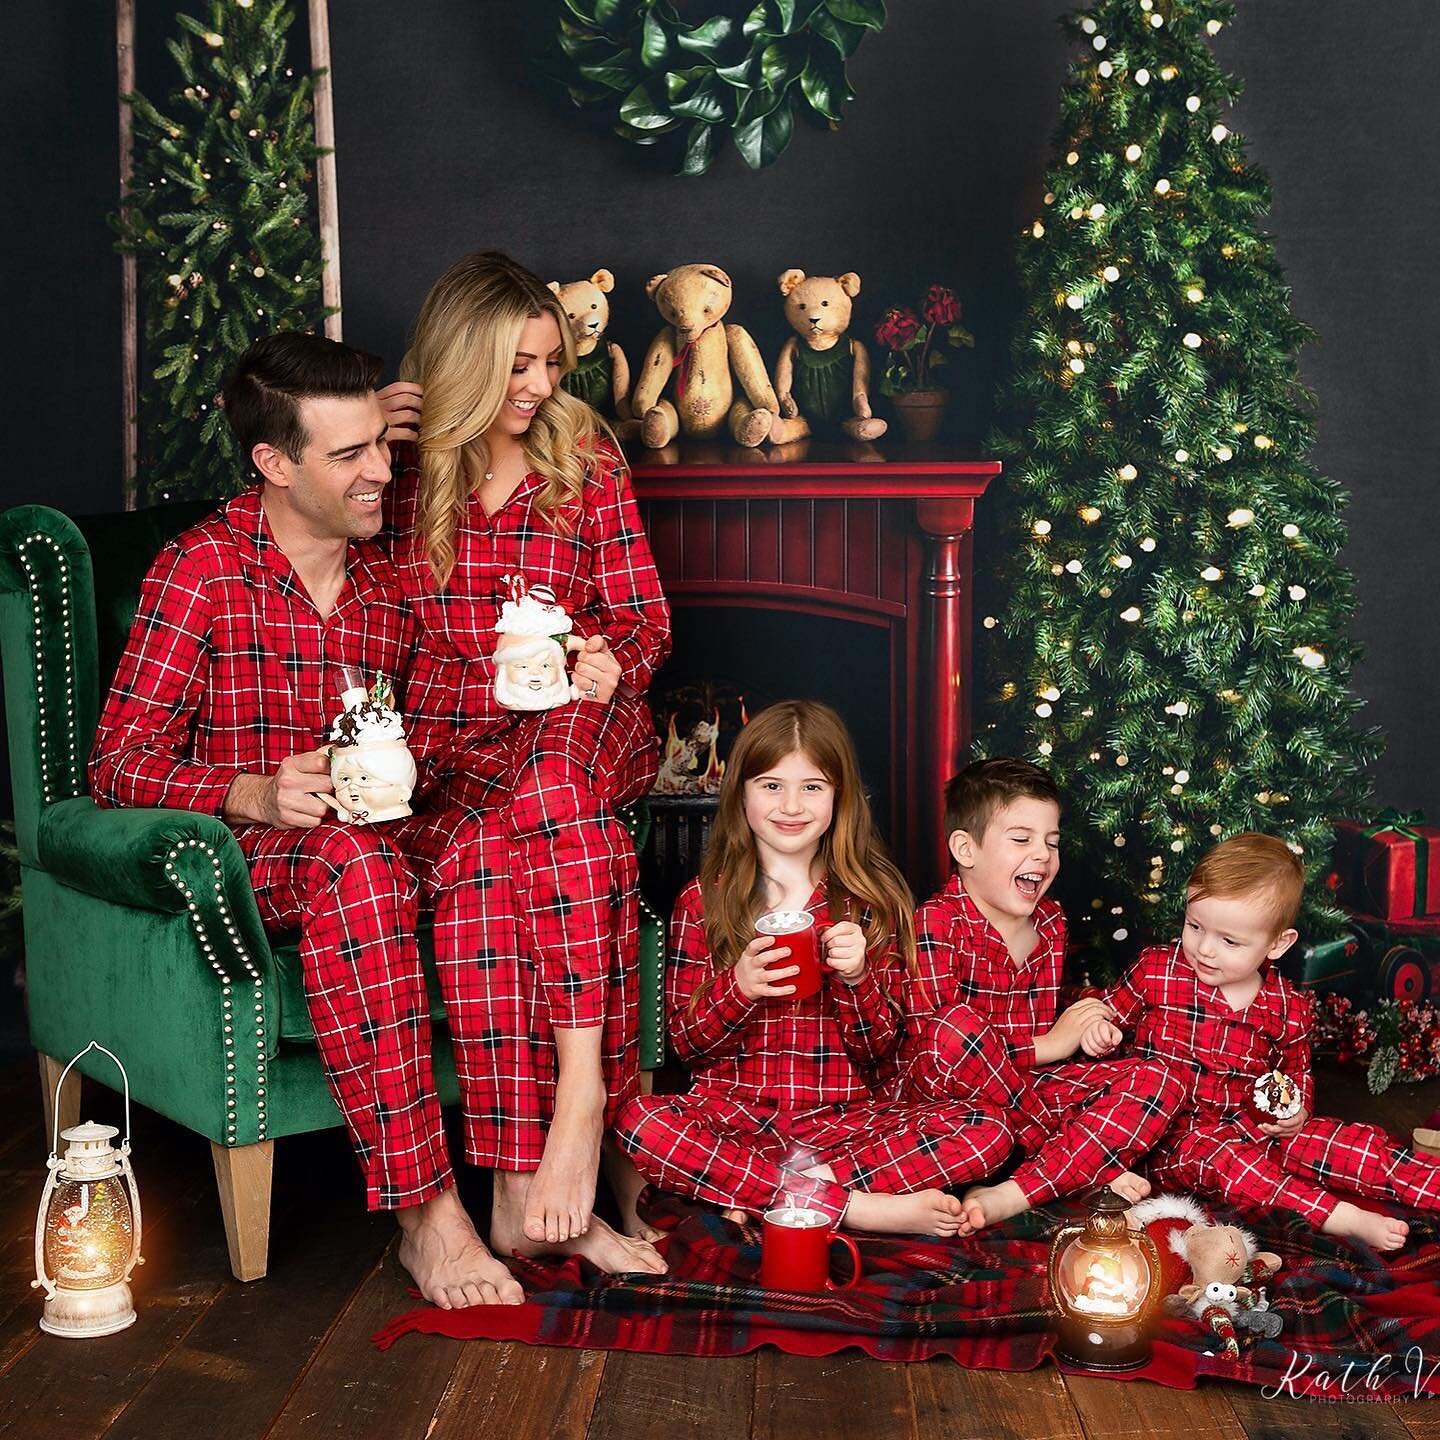 🎁 CHRISTMAS FAMILY MINIS 2022 🎁

Here's a sneak peek of our second set up!

🎄&rsquo;TWAS THE NIGHT BEFORE CHRISTMAS 🎄 

Cozy up with your loved ones with our intimate Christmas night theme &lsquo;Twas the Night Before Christmas. 

Imagine sitting